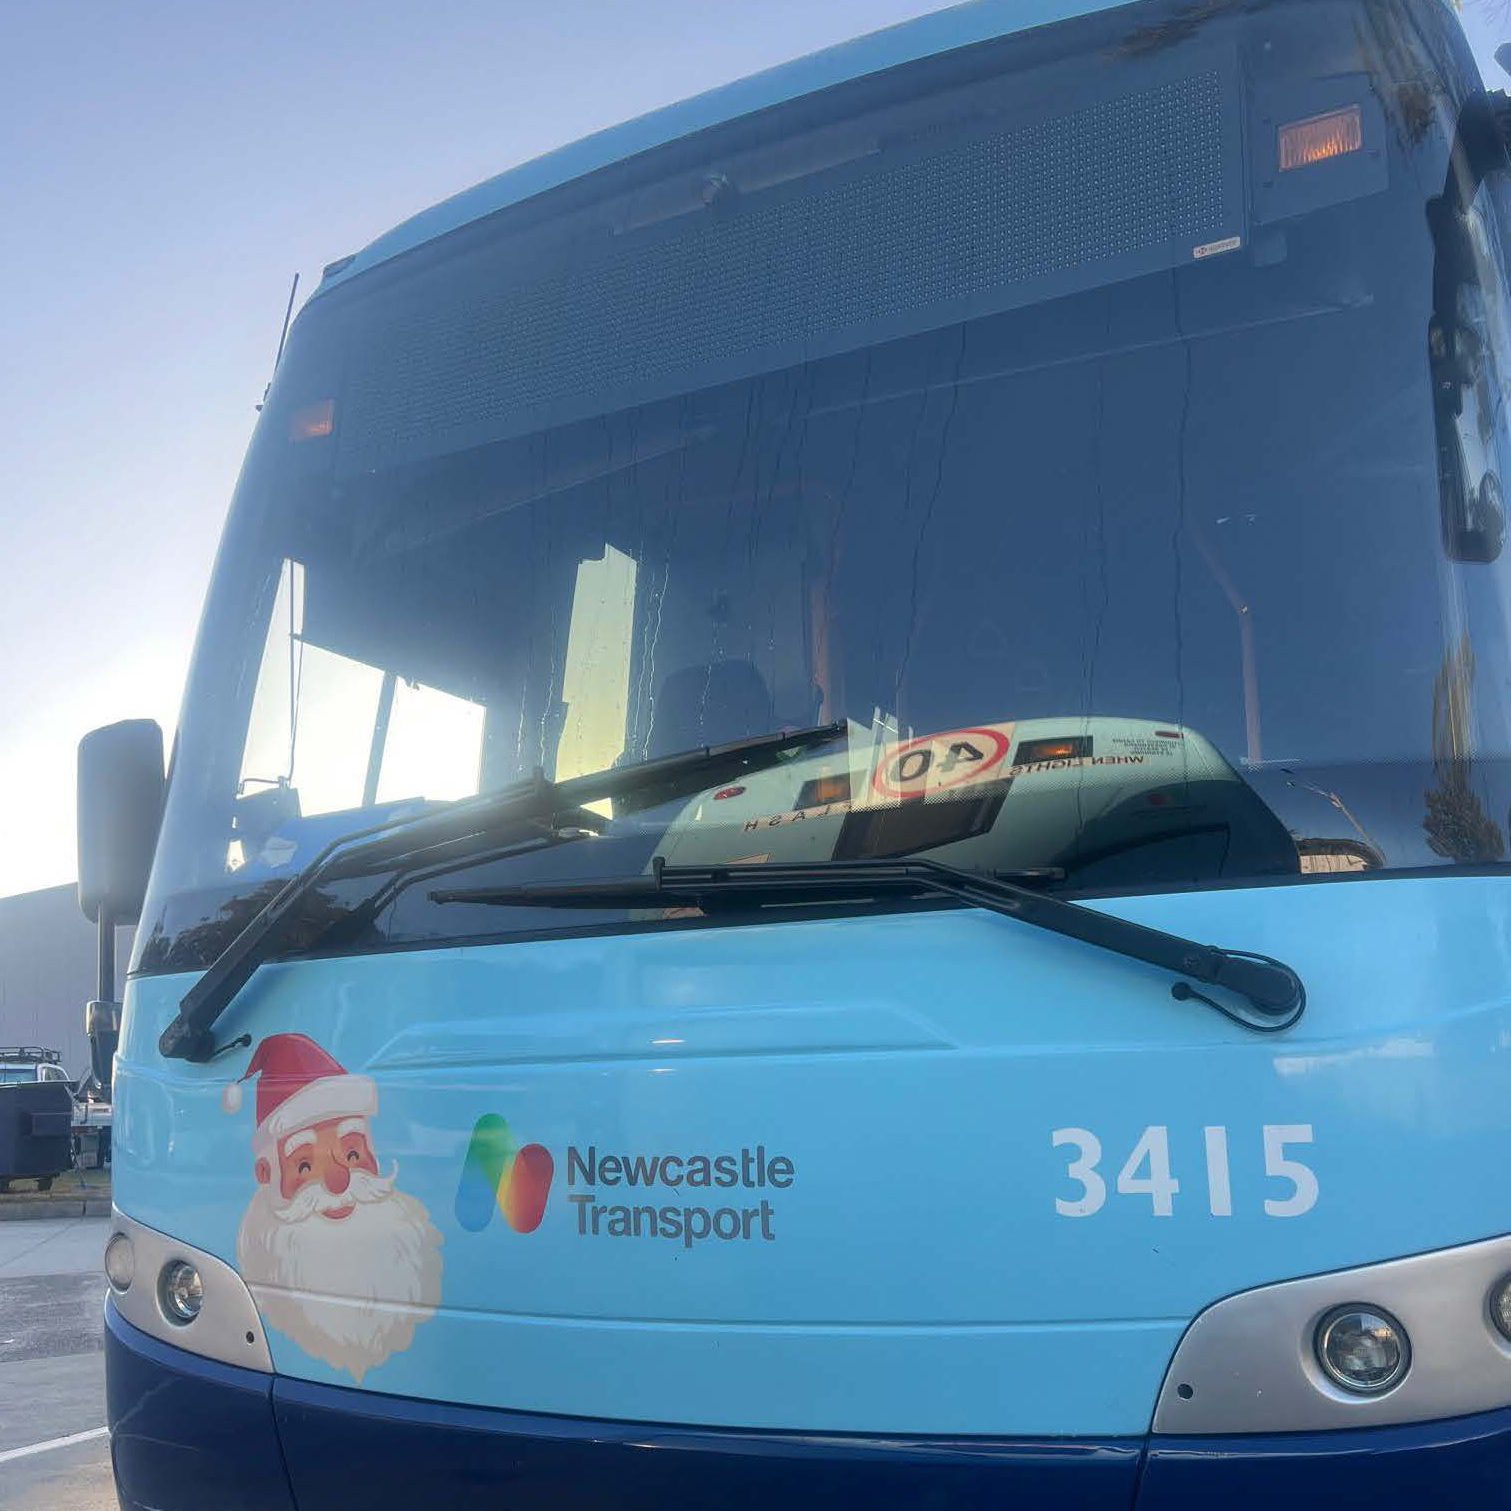 On Demand bus with Santa decal